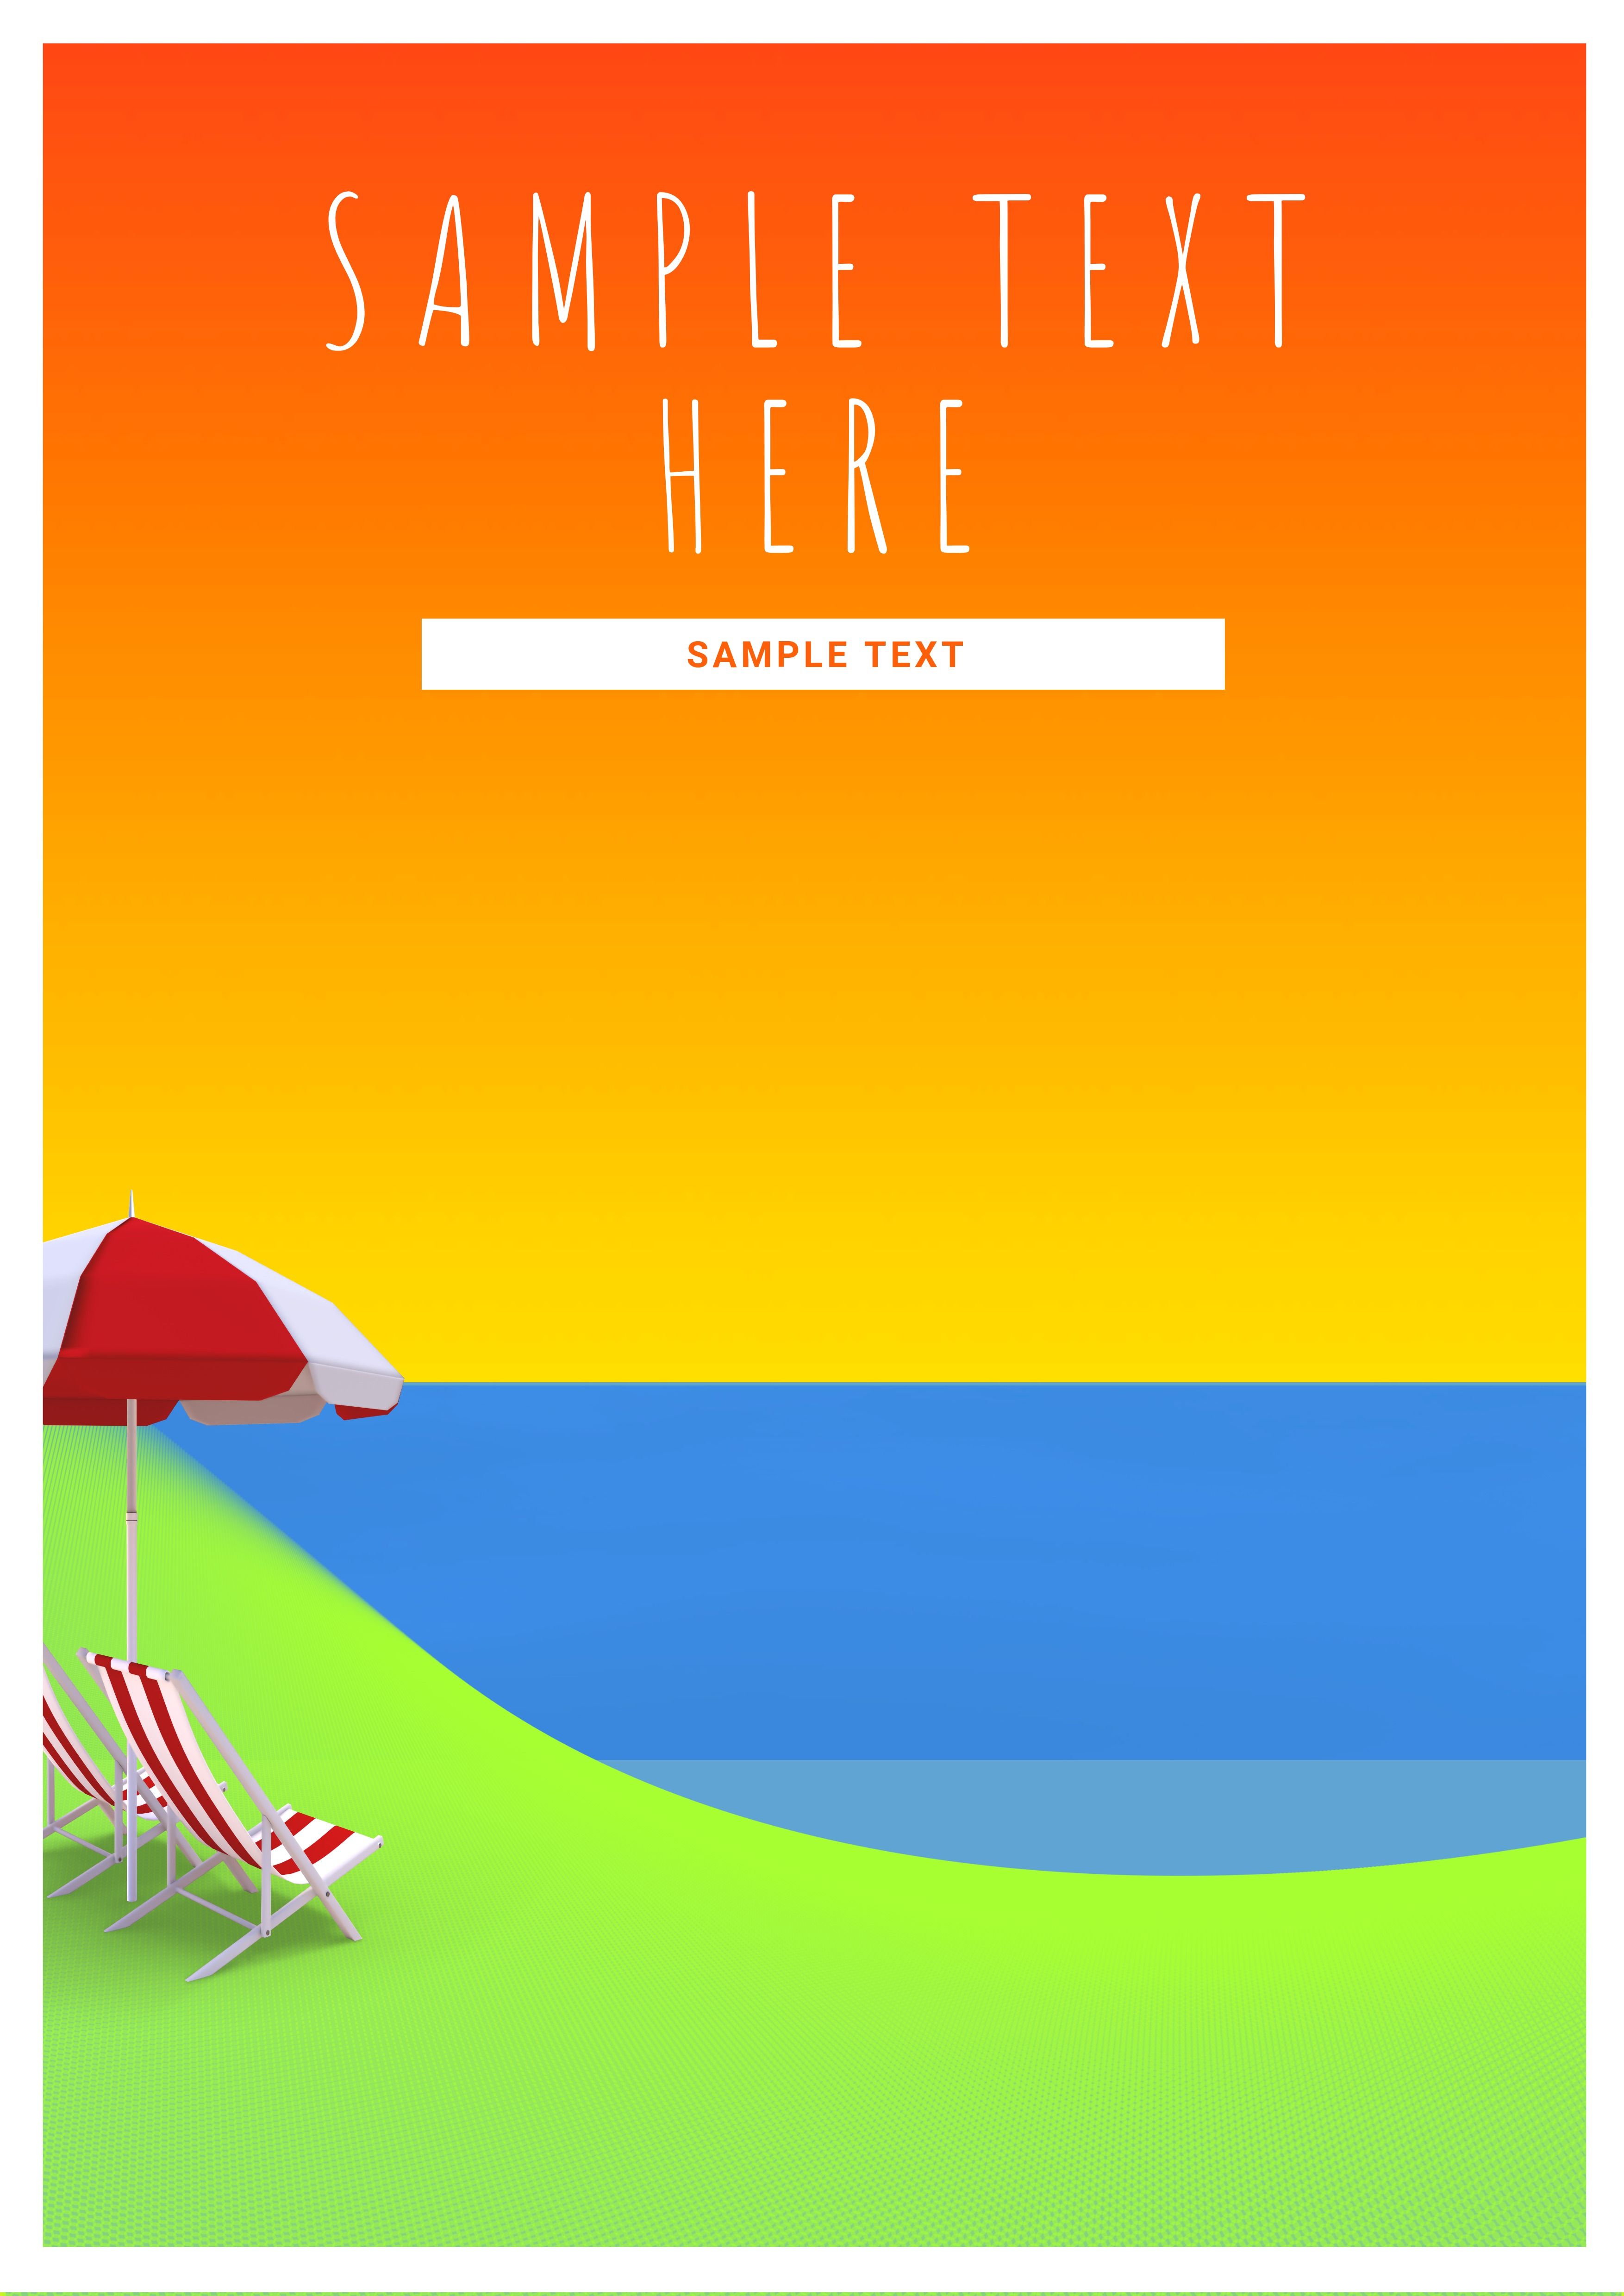 Summer poster template - Creative background ideas for inspiration - Image